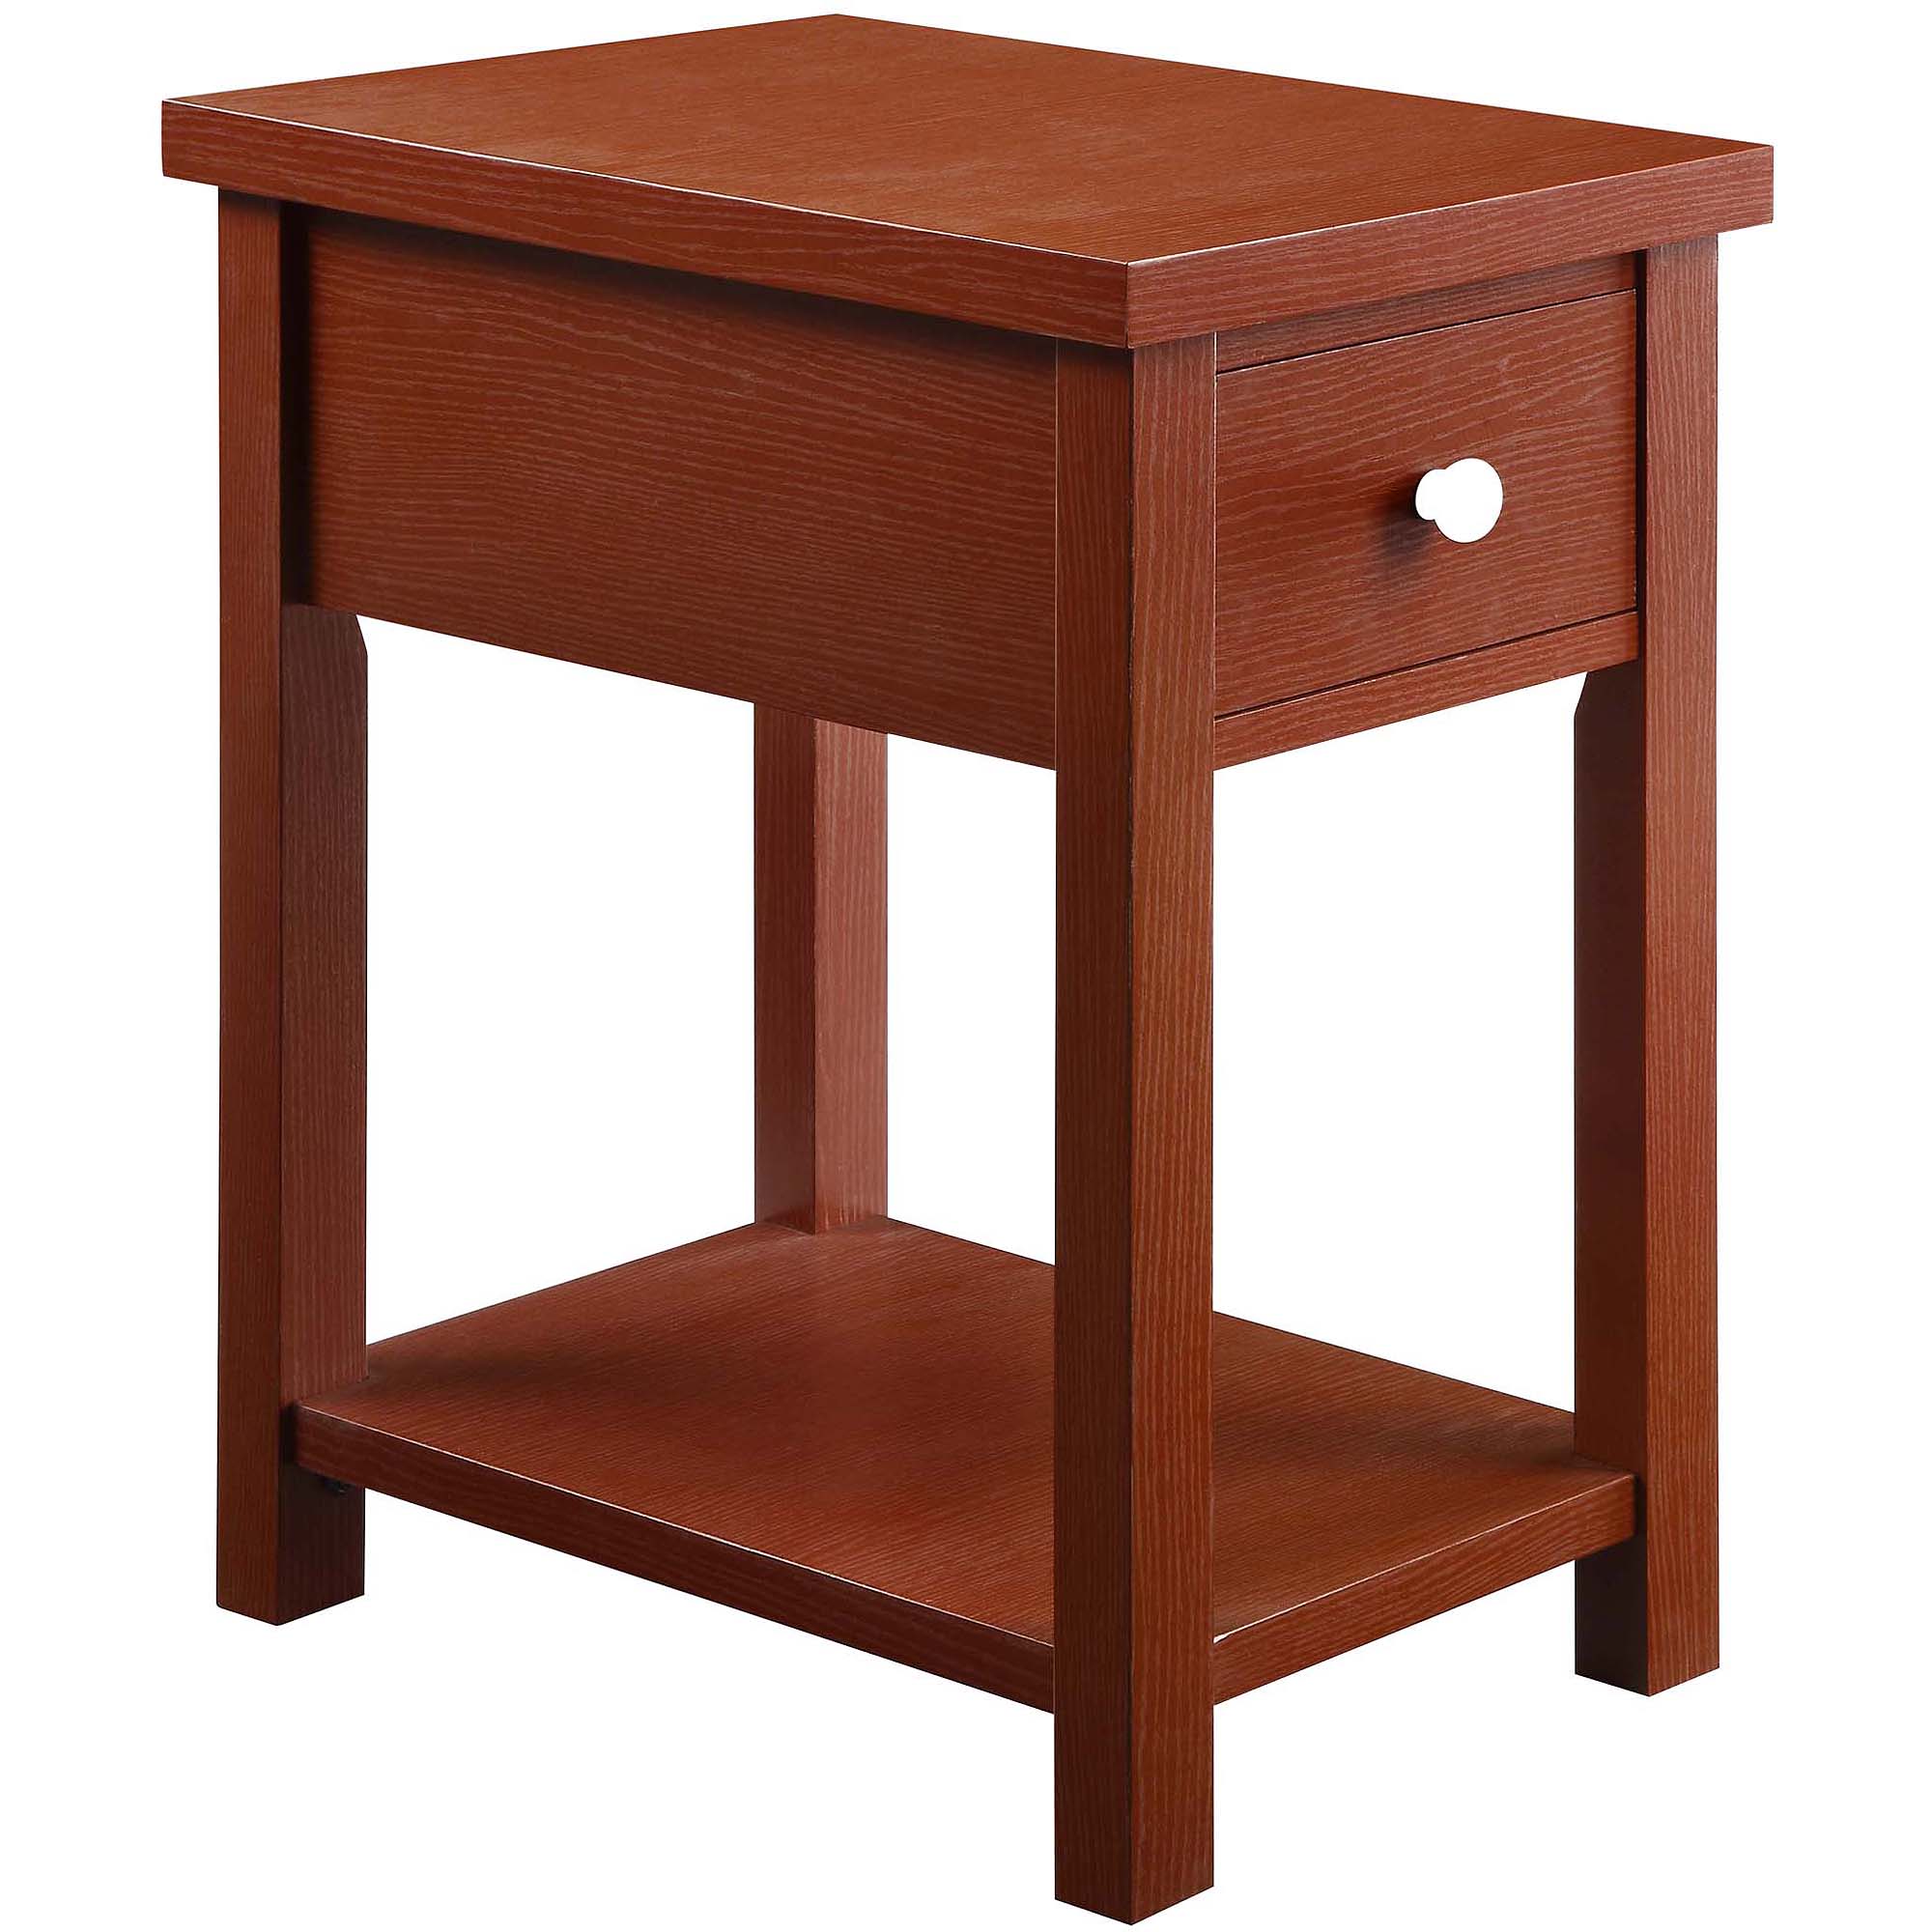 Better Homes & Gardens Oxford Square End Table with Drawer, Solid Wood, Multiple Finishes - image 4 of 5